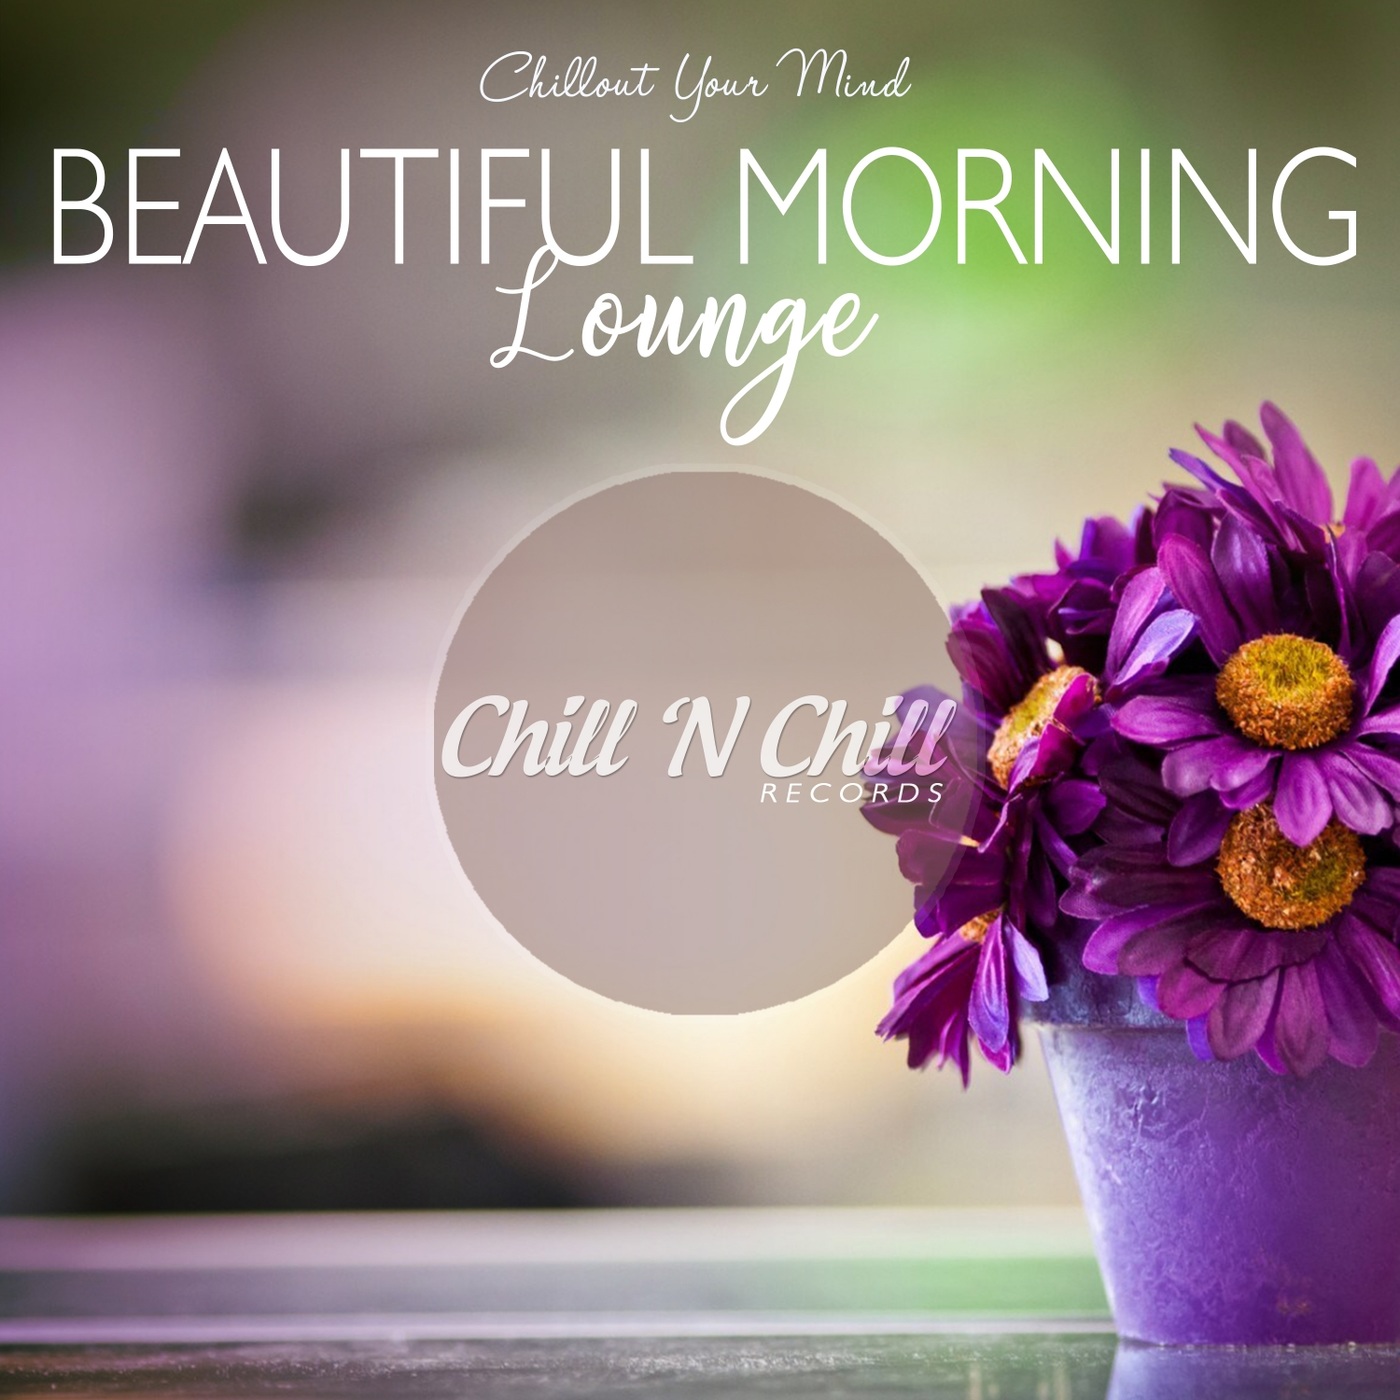 chill n chill records《beautiful morning lounge：chillout your mi